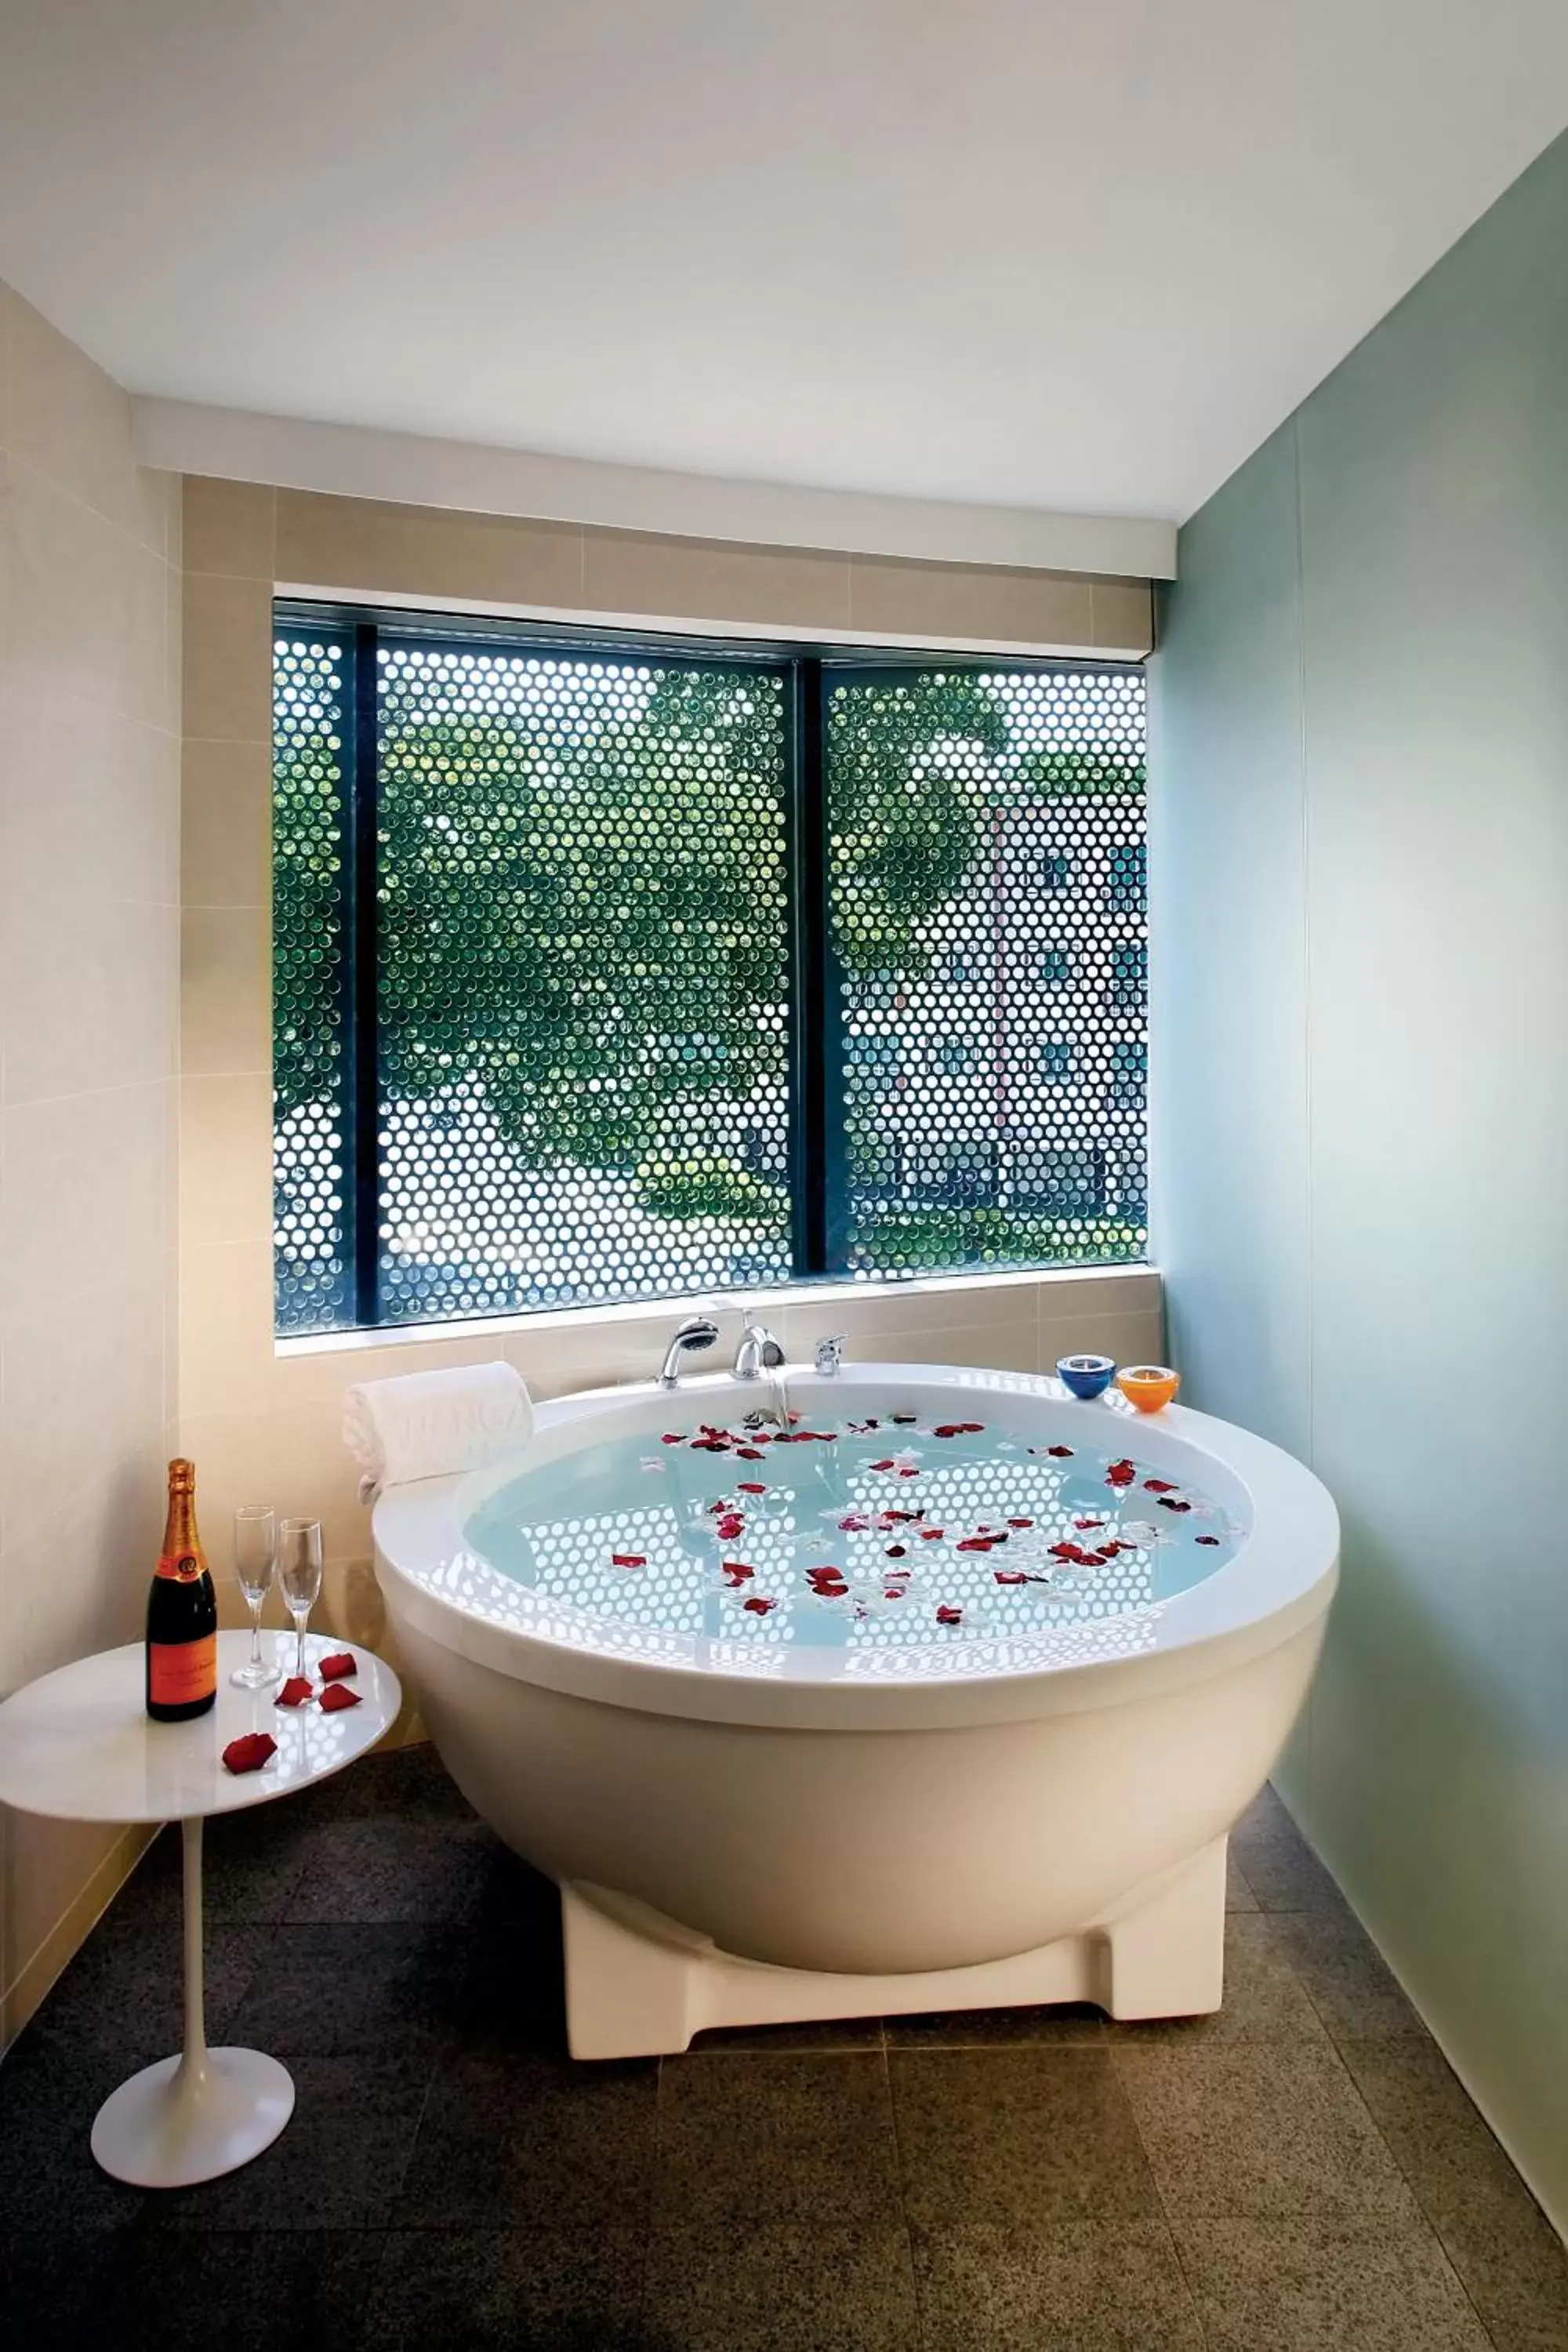 Bathroom in D'Hotel Singapore managed by The Ascott Limited